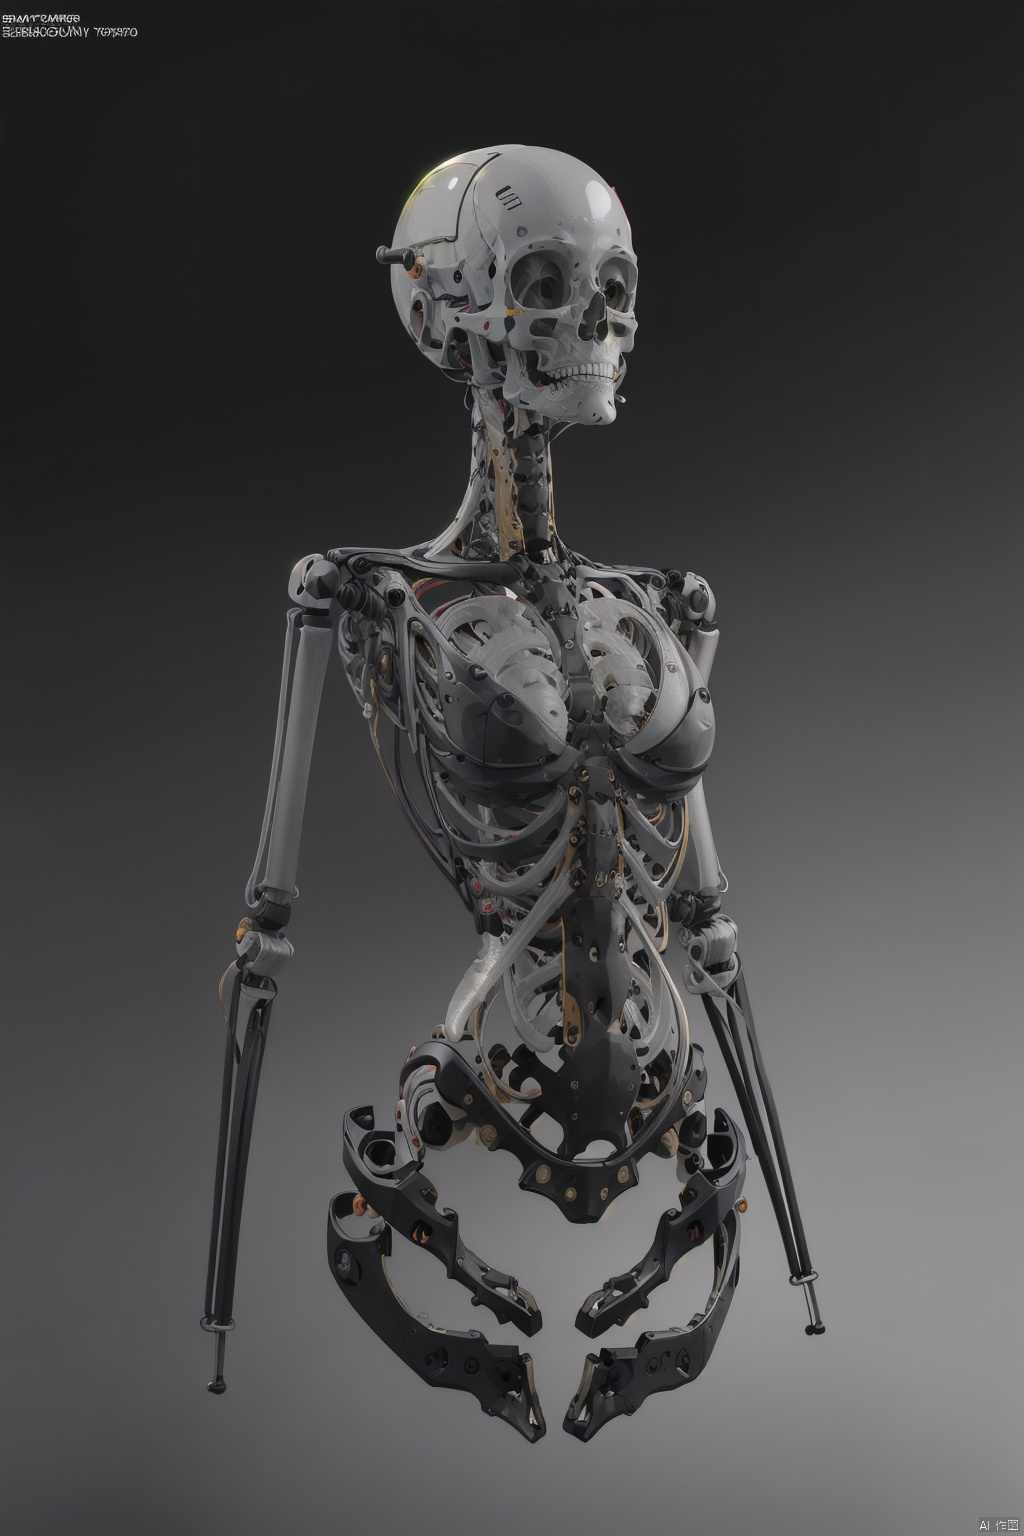  A robot prosthesis, bionic human bones, spine, ribs, ulna, , 
scapula, clavicle, mandible, no muscle skin, just skeleton, simple semi-finished robotics industrial product design.